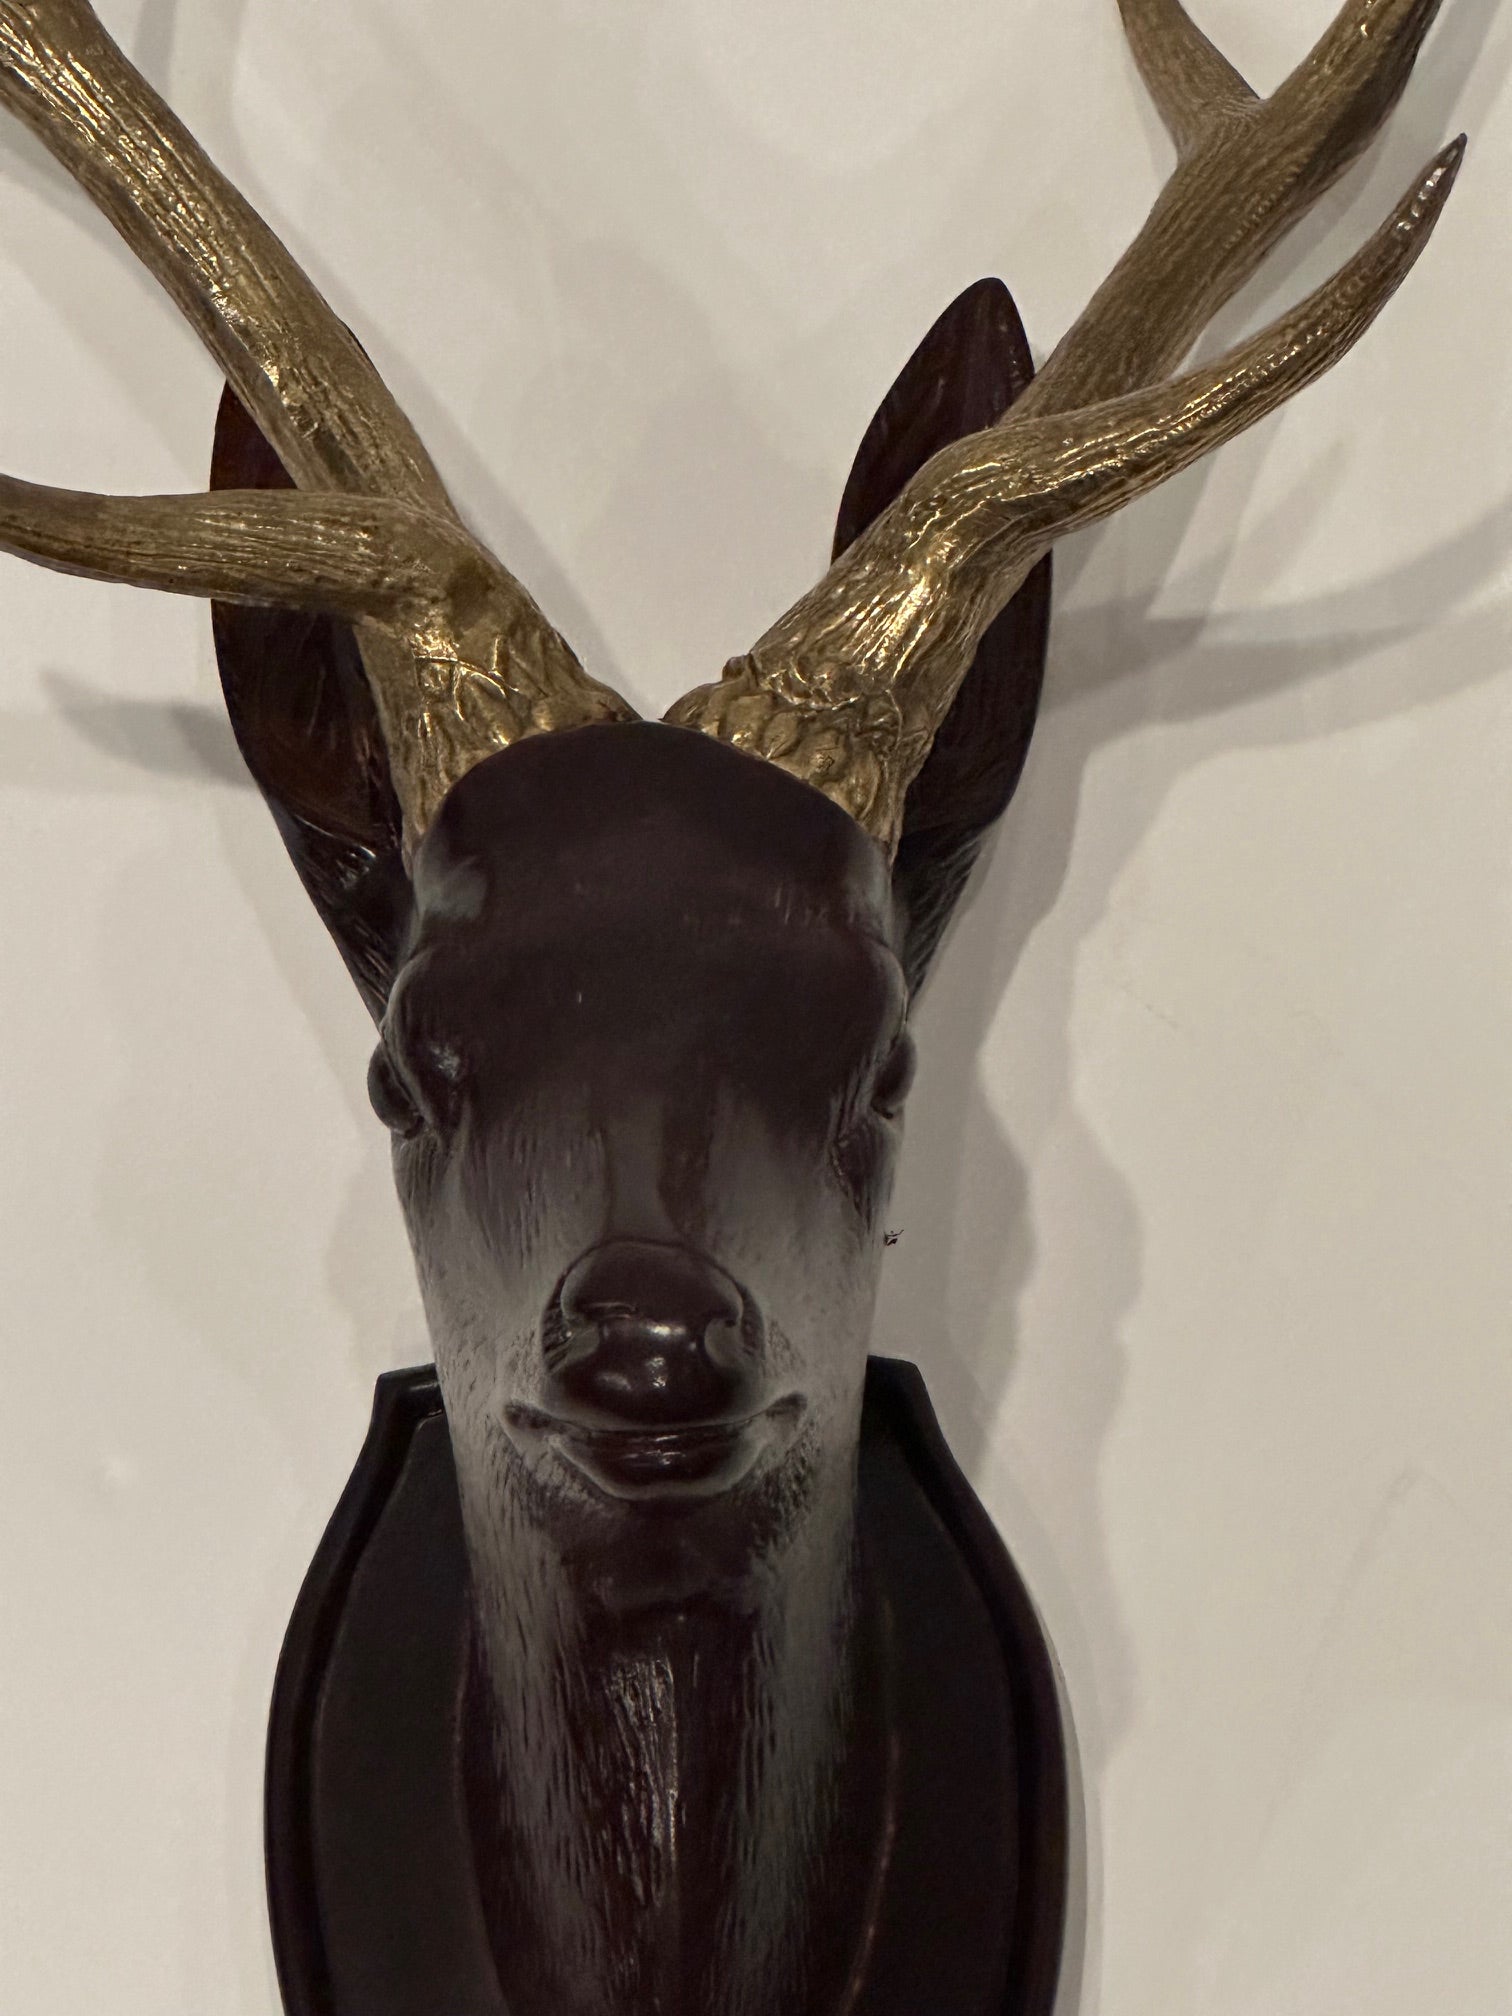 Wonderful wall sculpture of a hand carved wooden stag having striking brass horns.